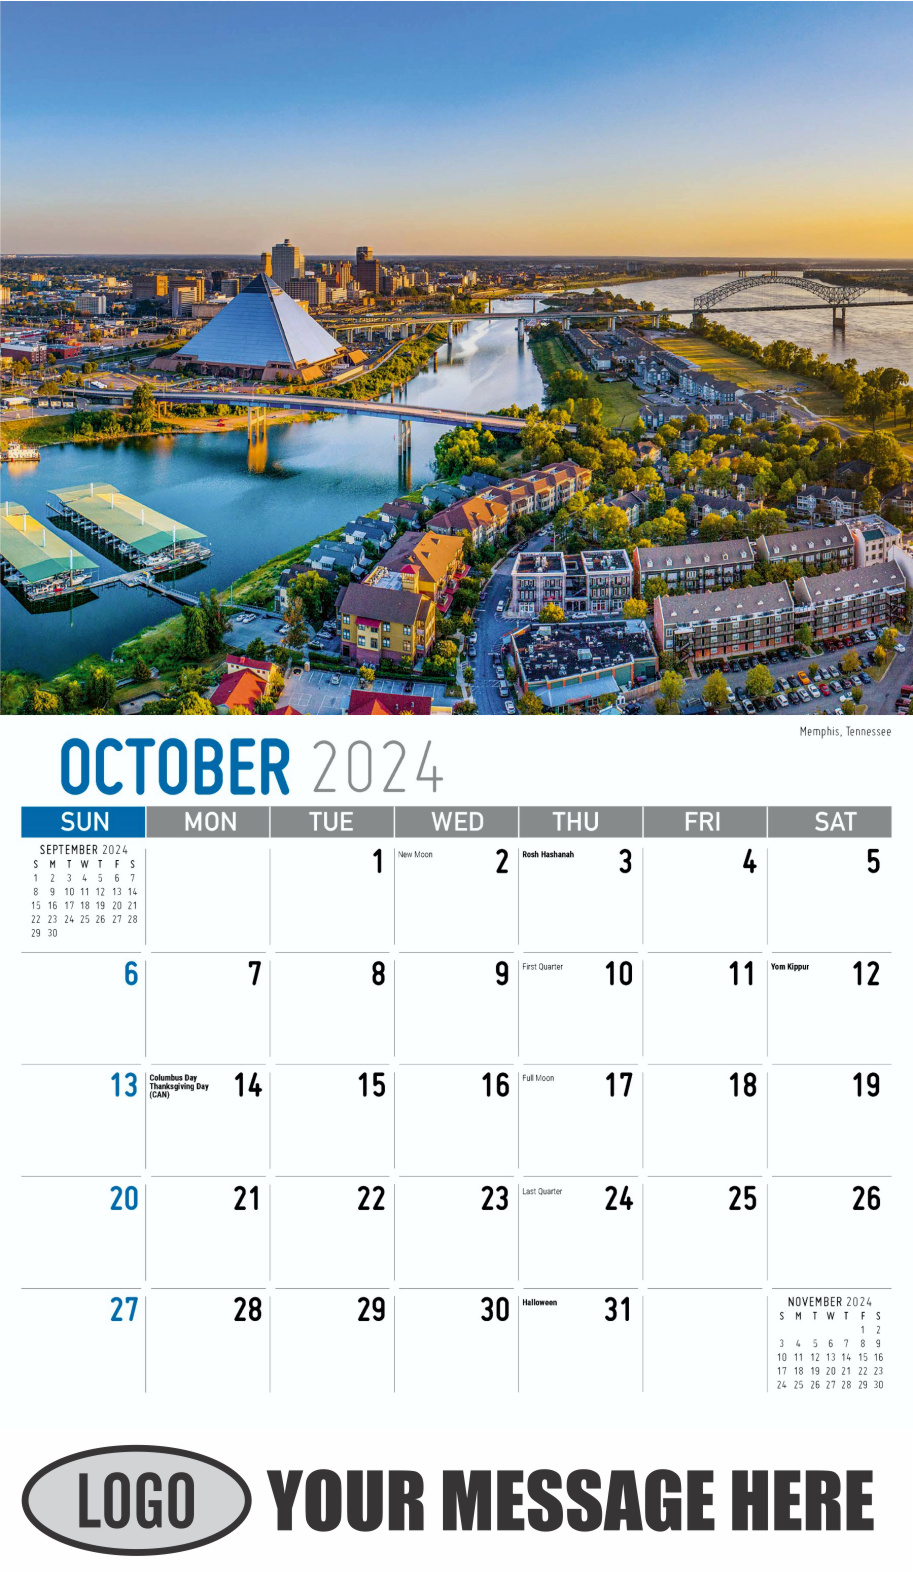 Scenes of Southeast USA 2024 Business Promo Wall Calendar - October